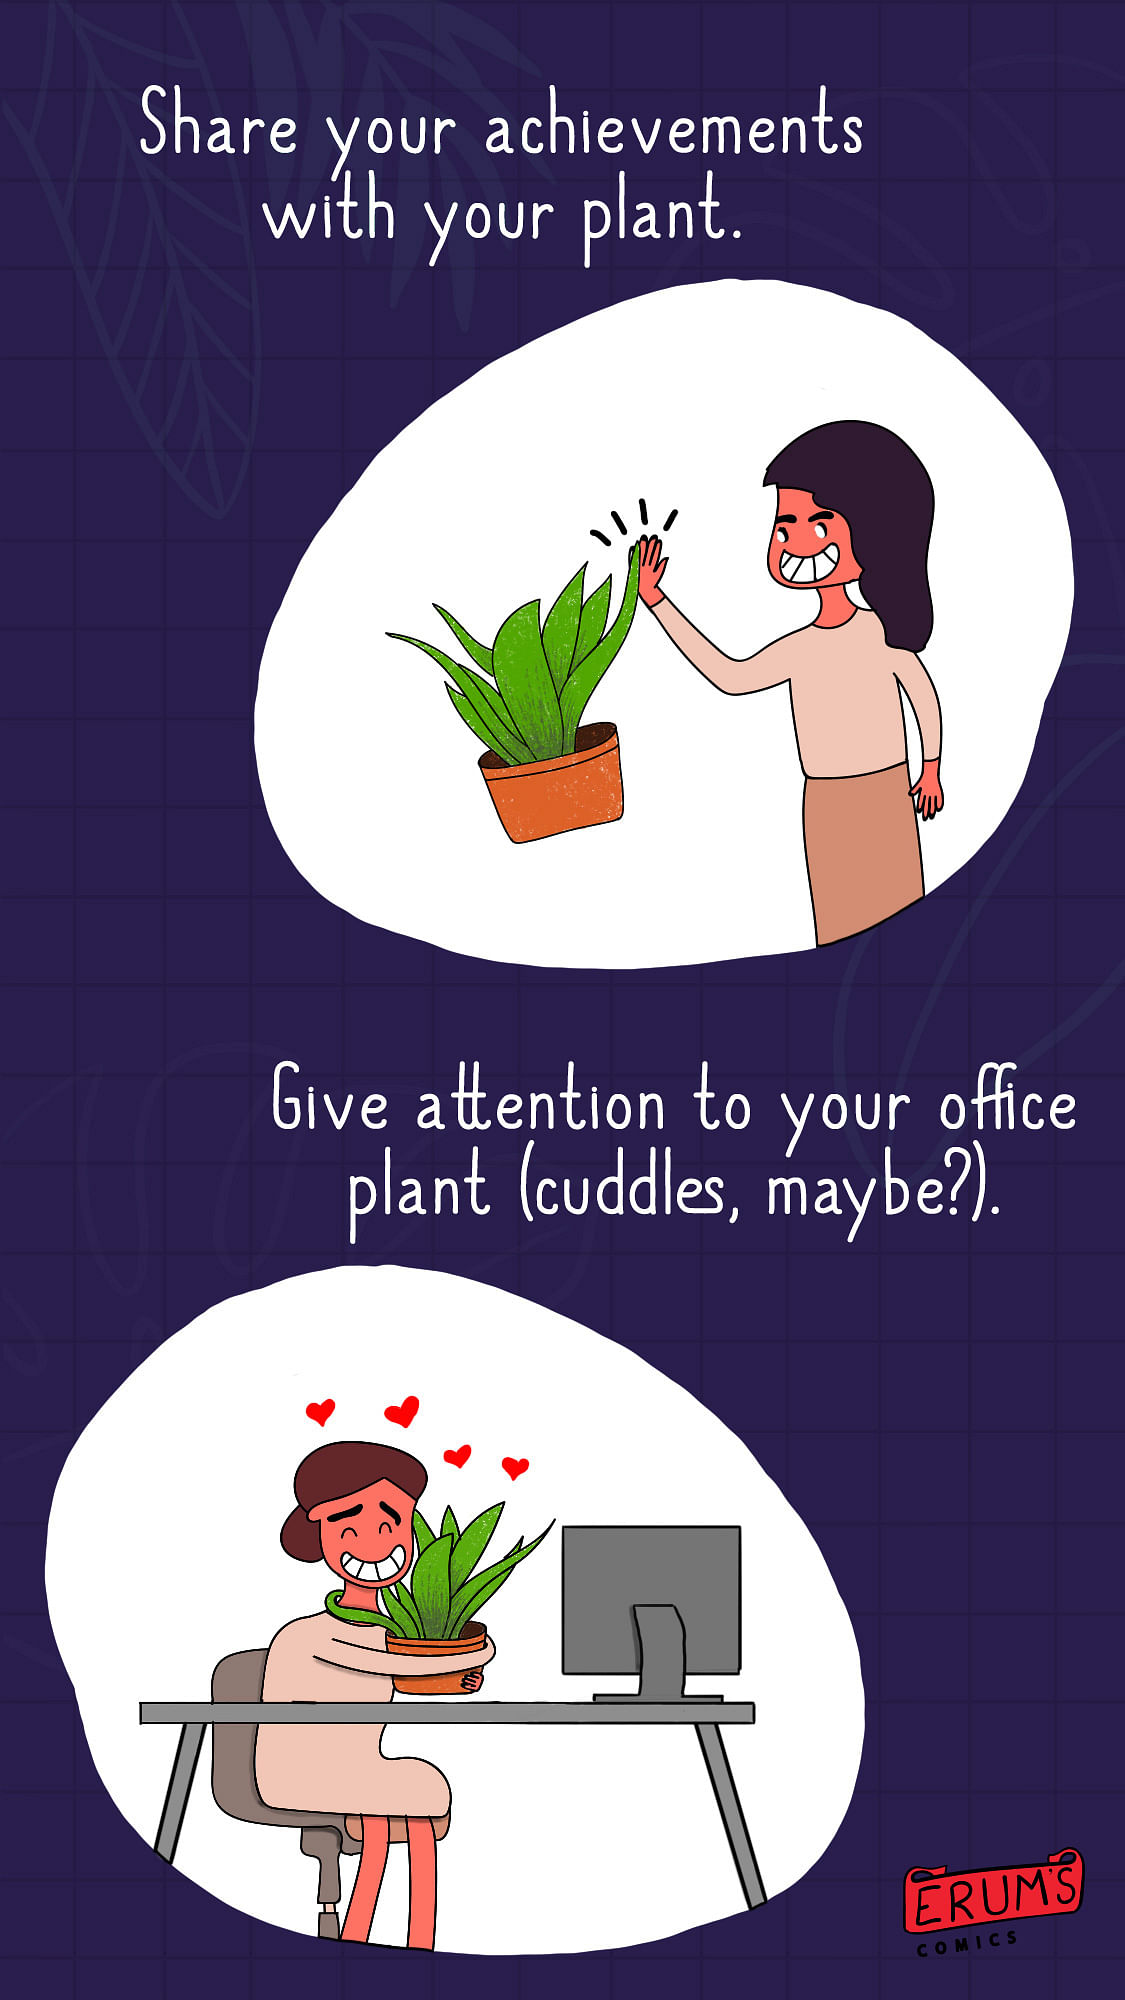 I think it’s time that we stopped ignoring our precious office plants.